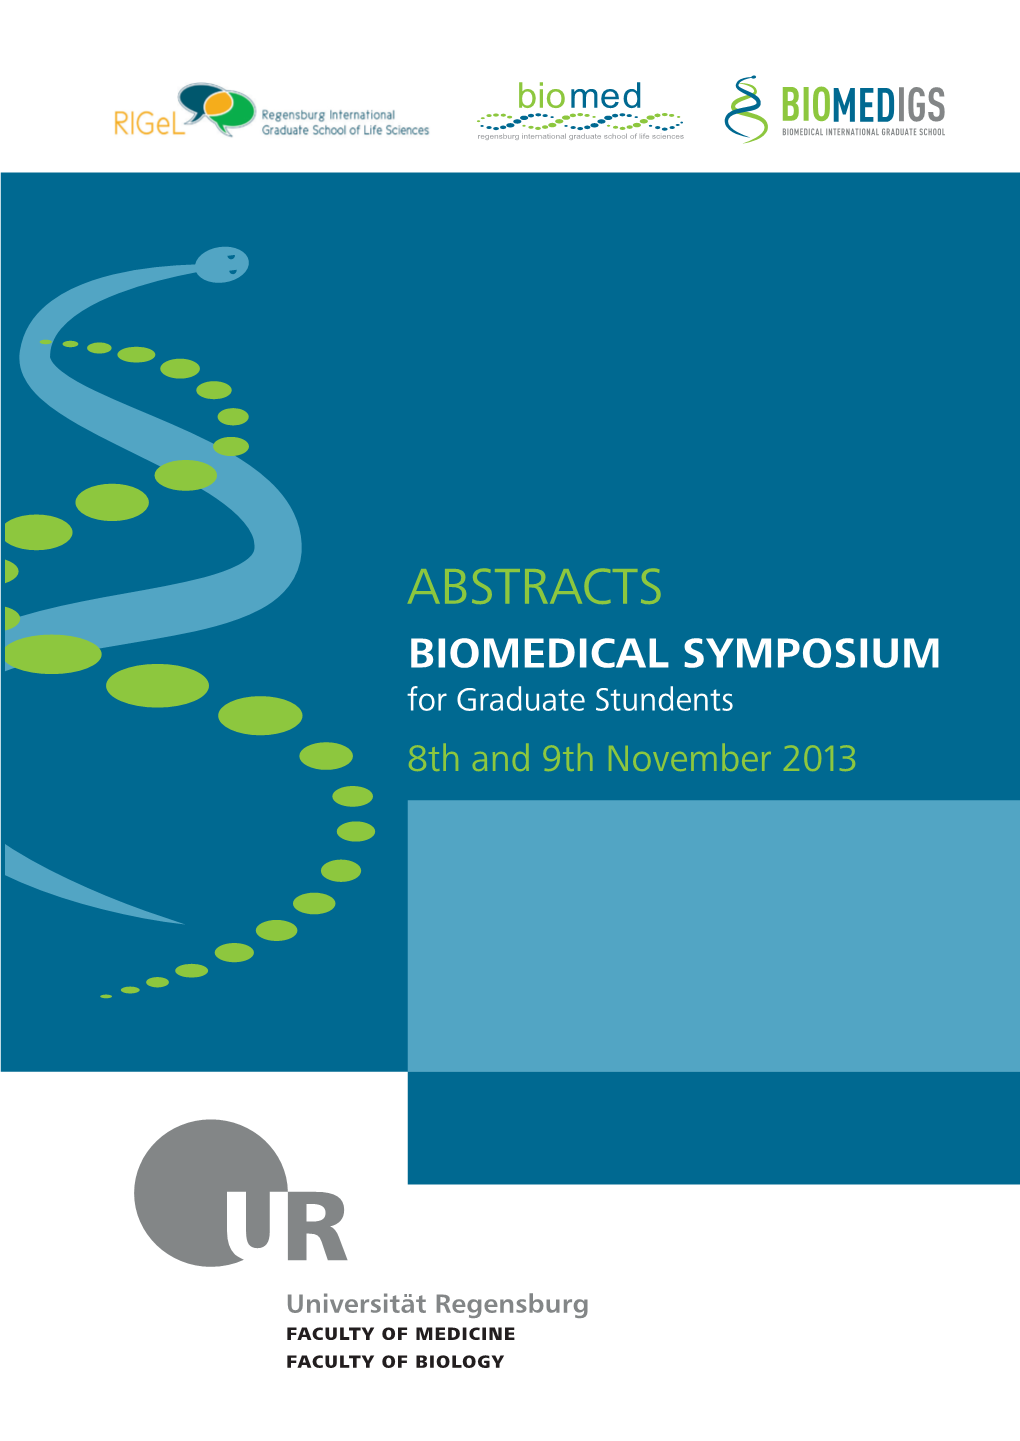 ABSTRACTS BIOMEDICAL SYMPOSIUM for Graduate Stundents 8Th and 9Th November 2013